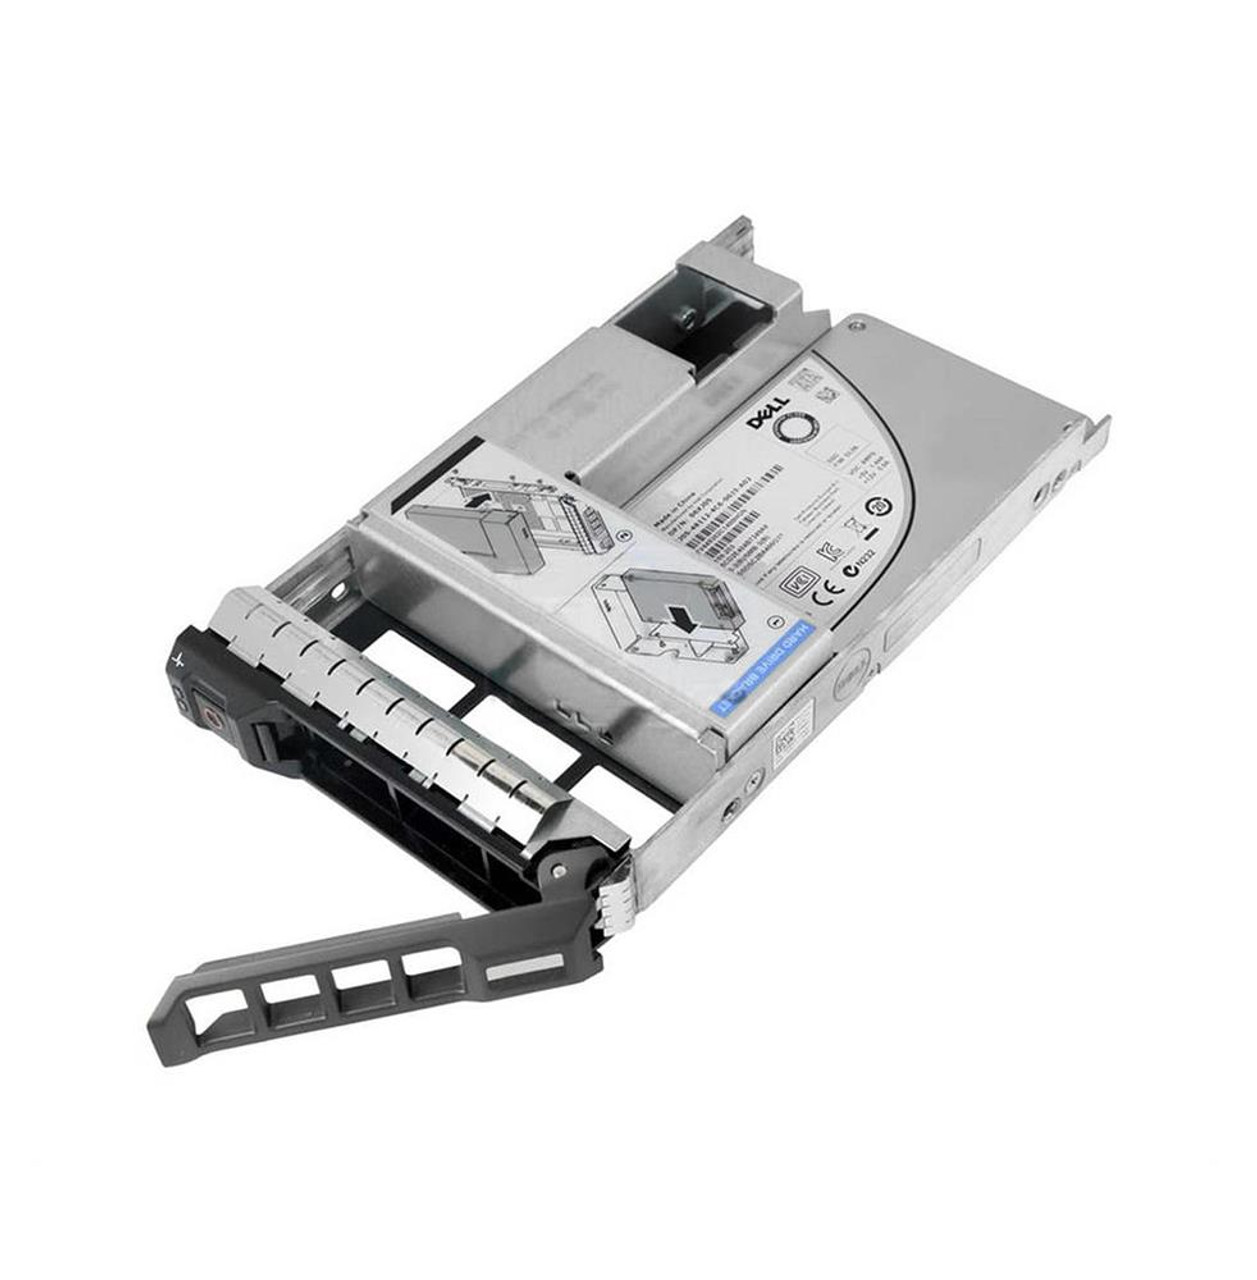 400-ATFN Dell 120GB SATA 2.5-inch Internal Solid State Drive (SSD) with